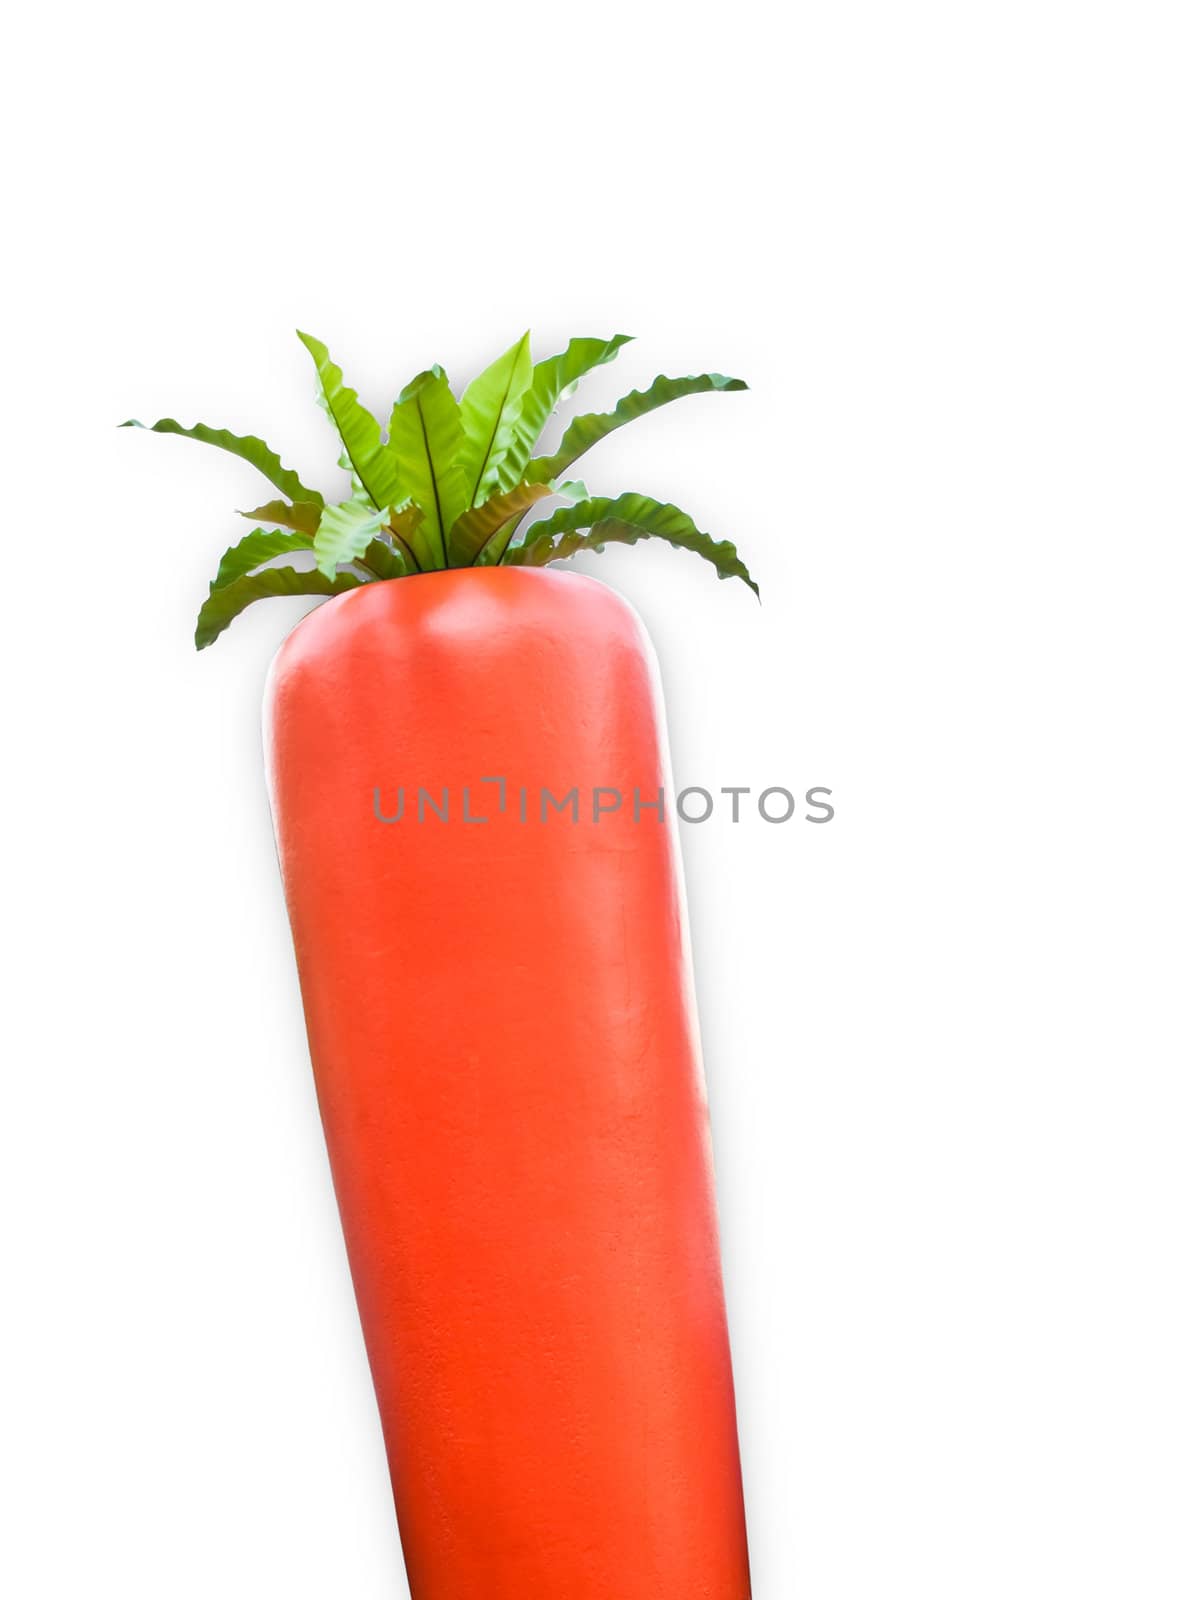 Big carrot isolated on white background